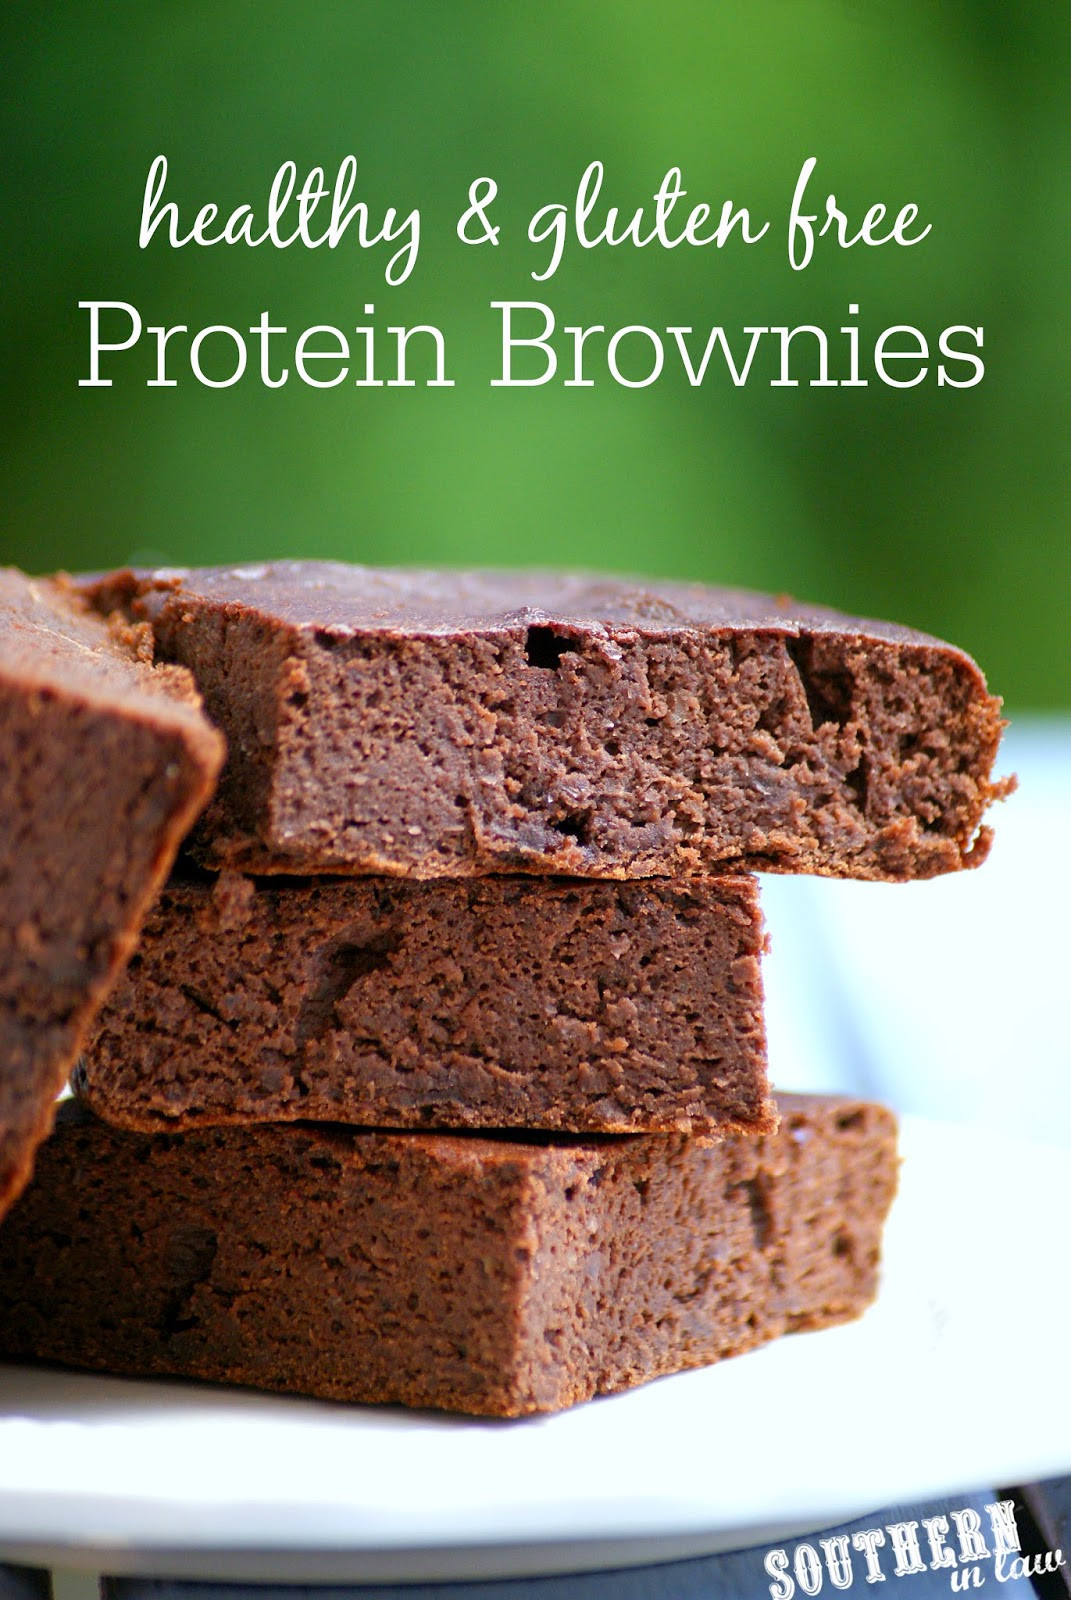 Healthy Protein Brownies
 Southern In Law Recipe Healthy Flourless Protein Brownies